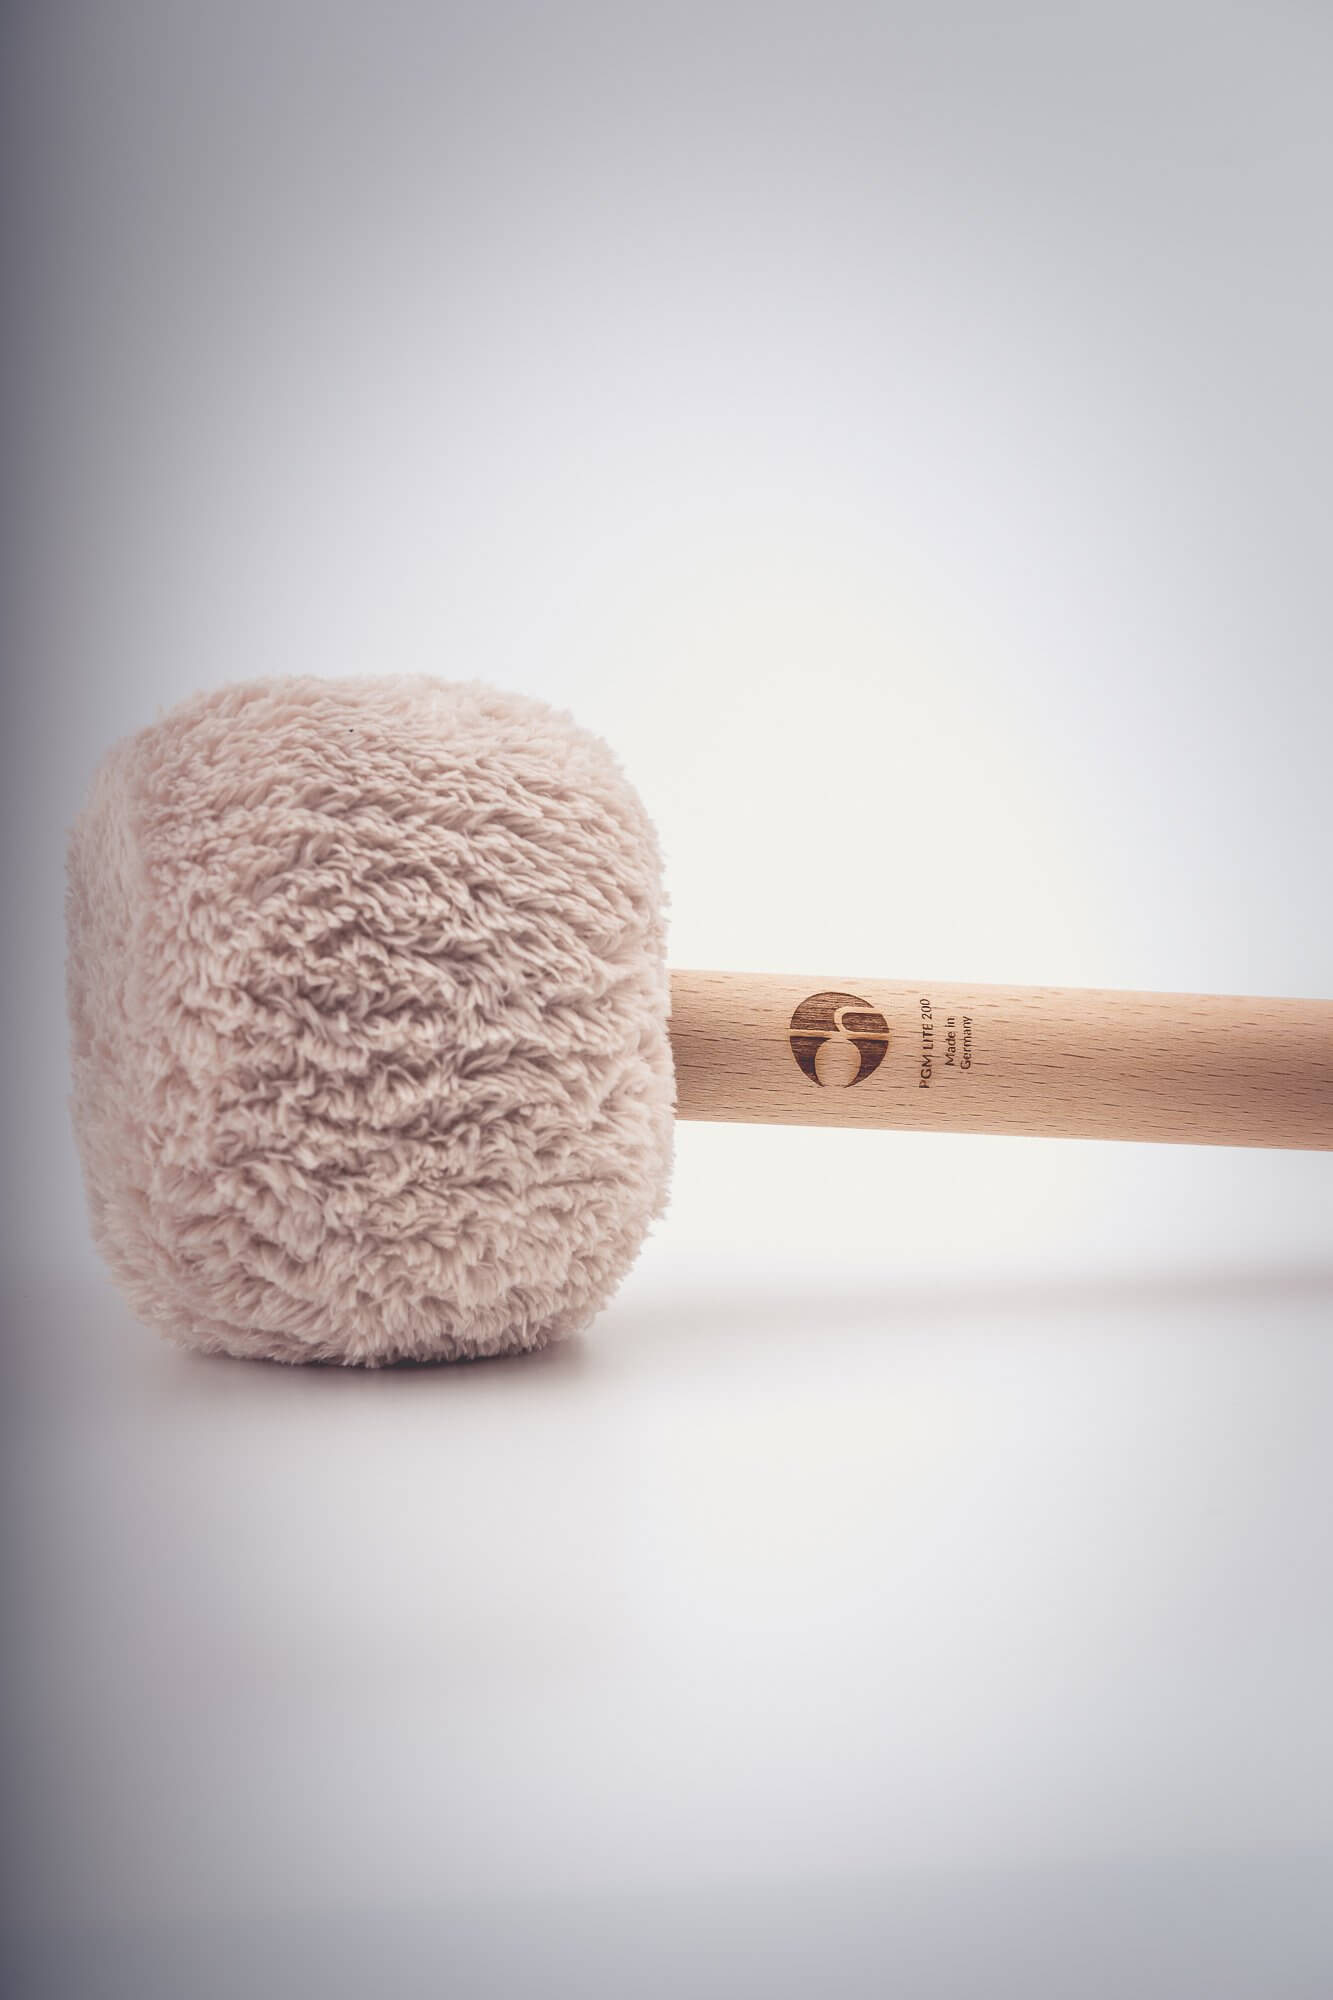 Professional gong Mallet lite 100